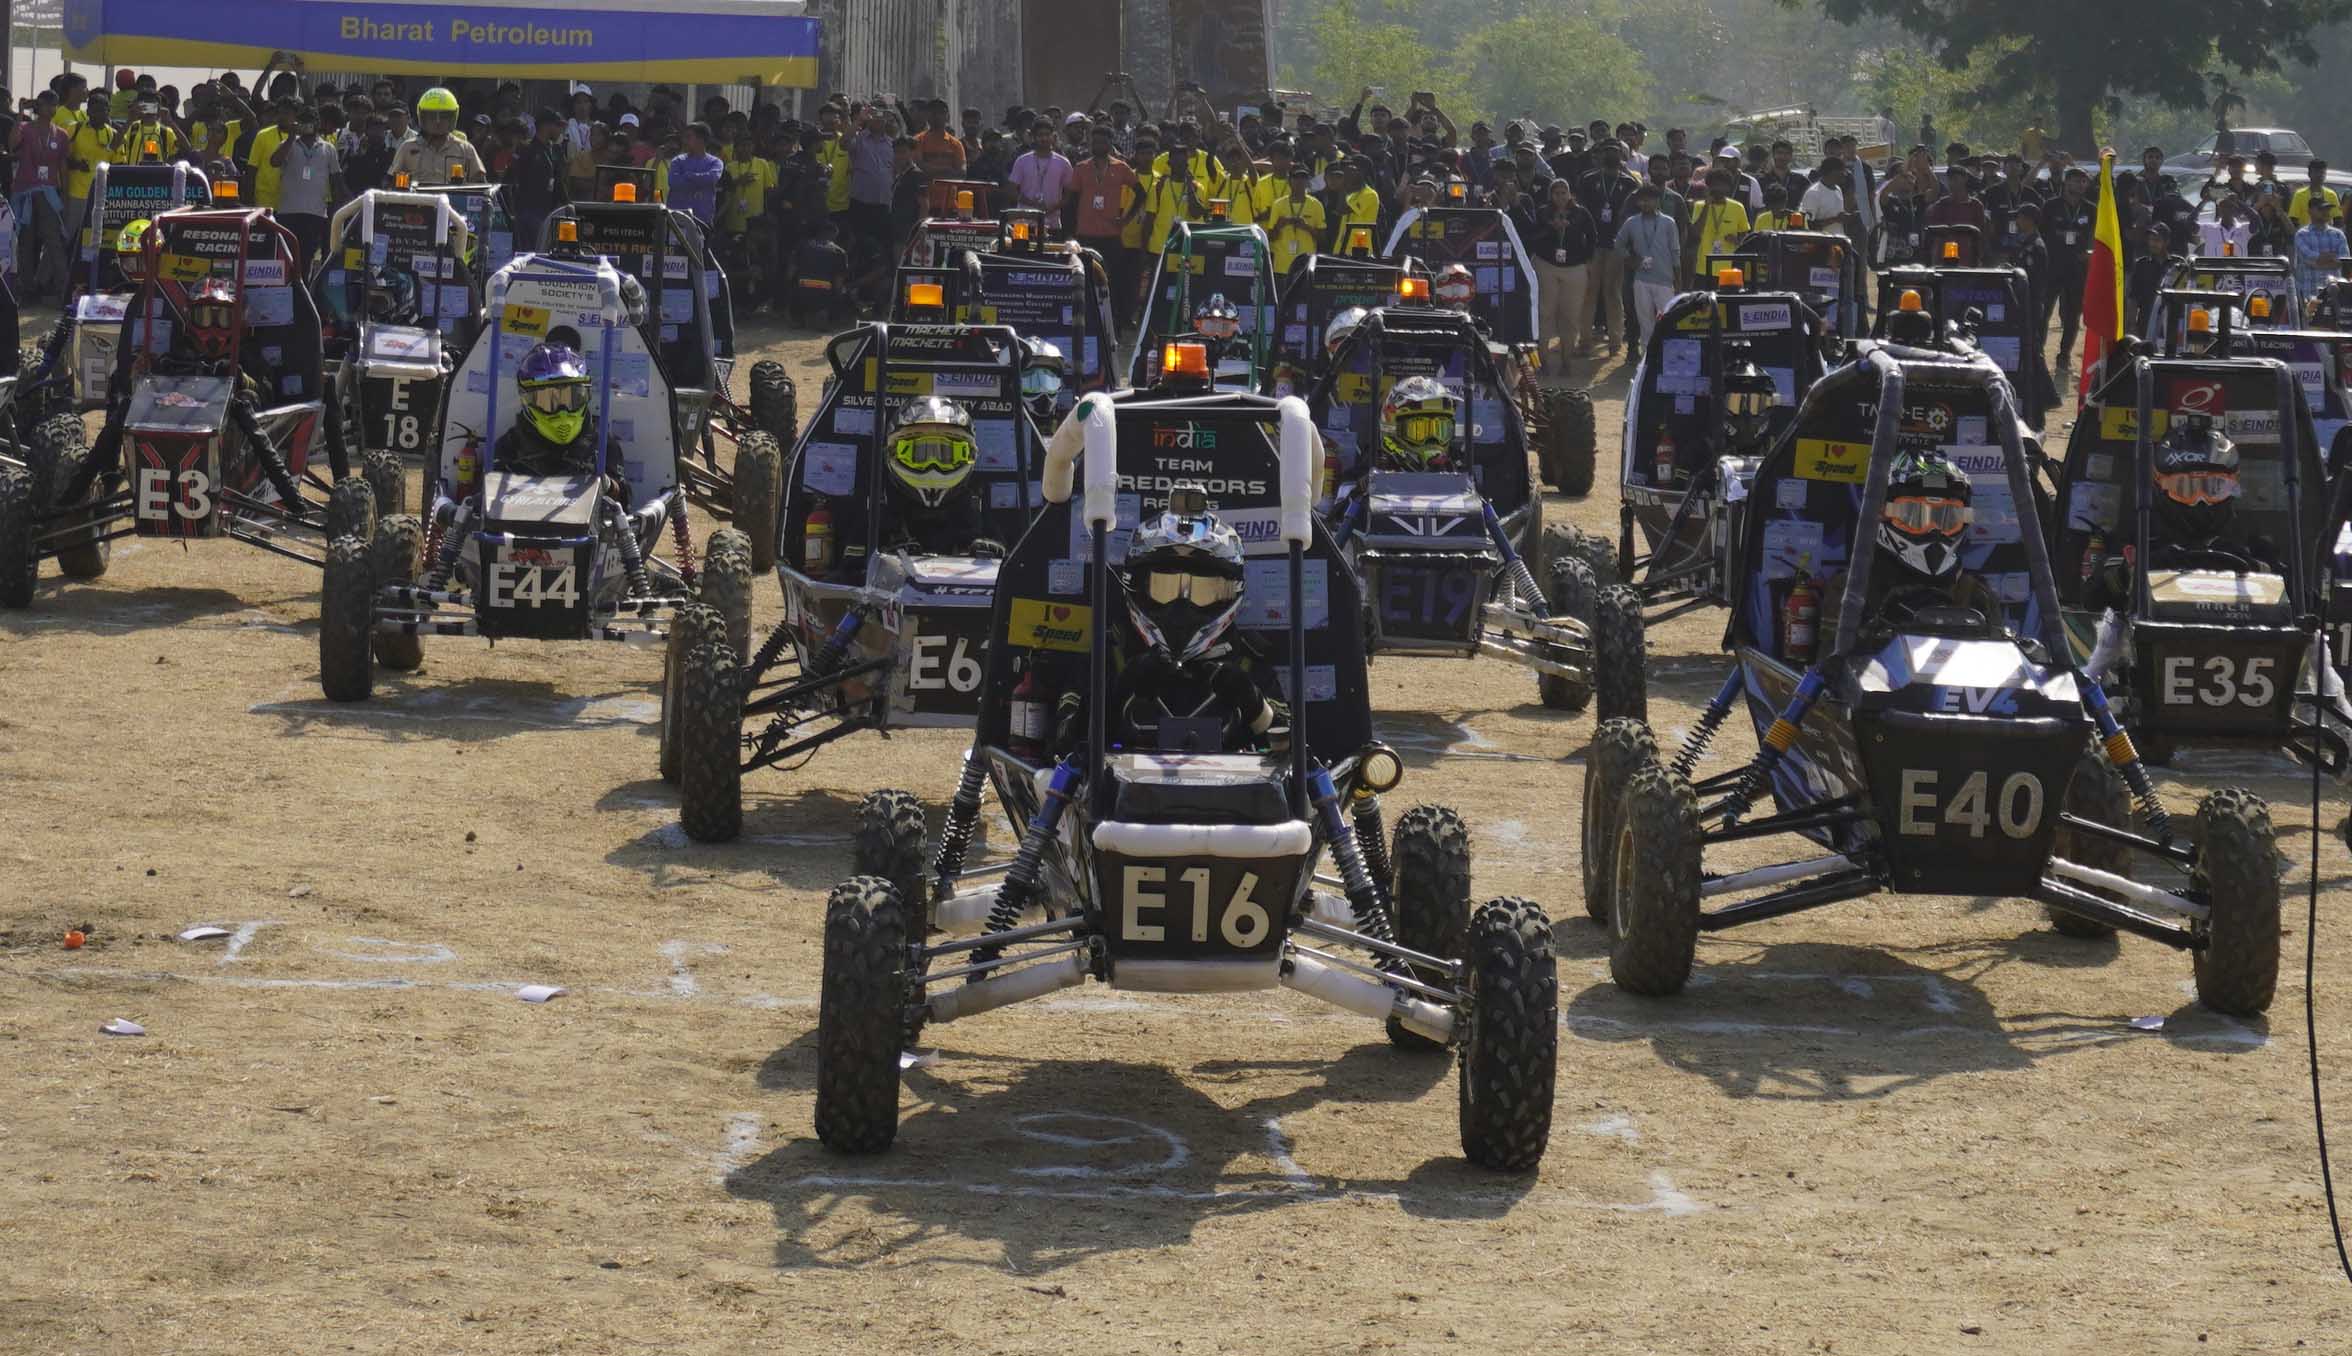 eBAJA SAEINDIA 2024 COMPETITION HELD. 47 ALL TERRAIN ELECTRIC BUGGIES BUILT BY ENGINEERING STUDENTS PARTICIPATED IN THE ENDURANCE TEST-23